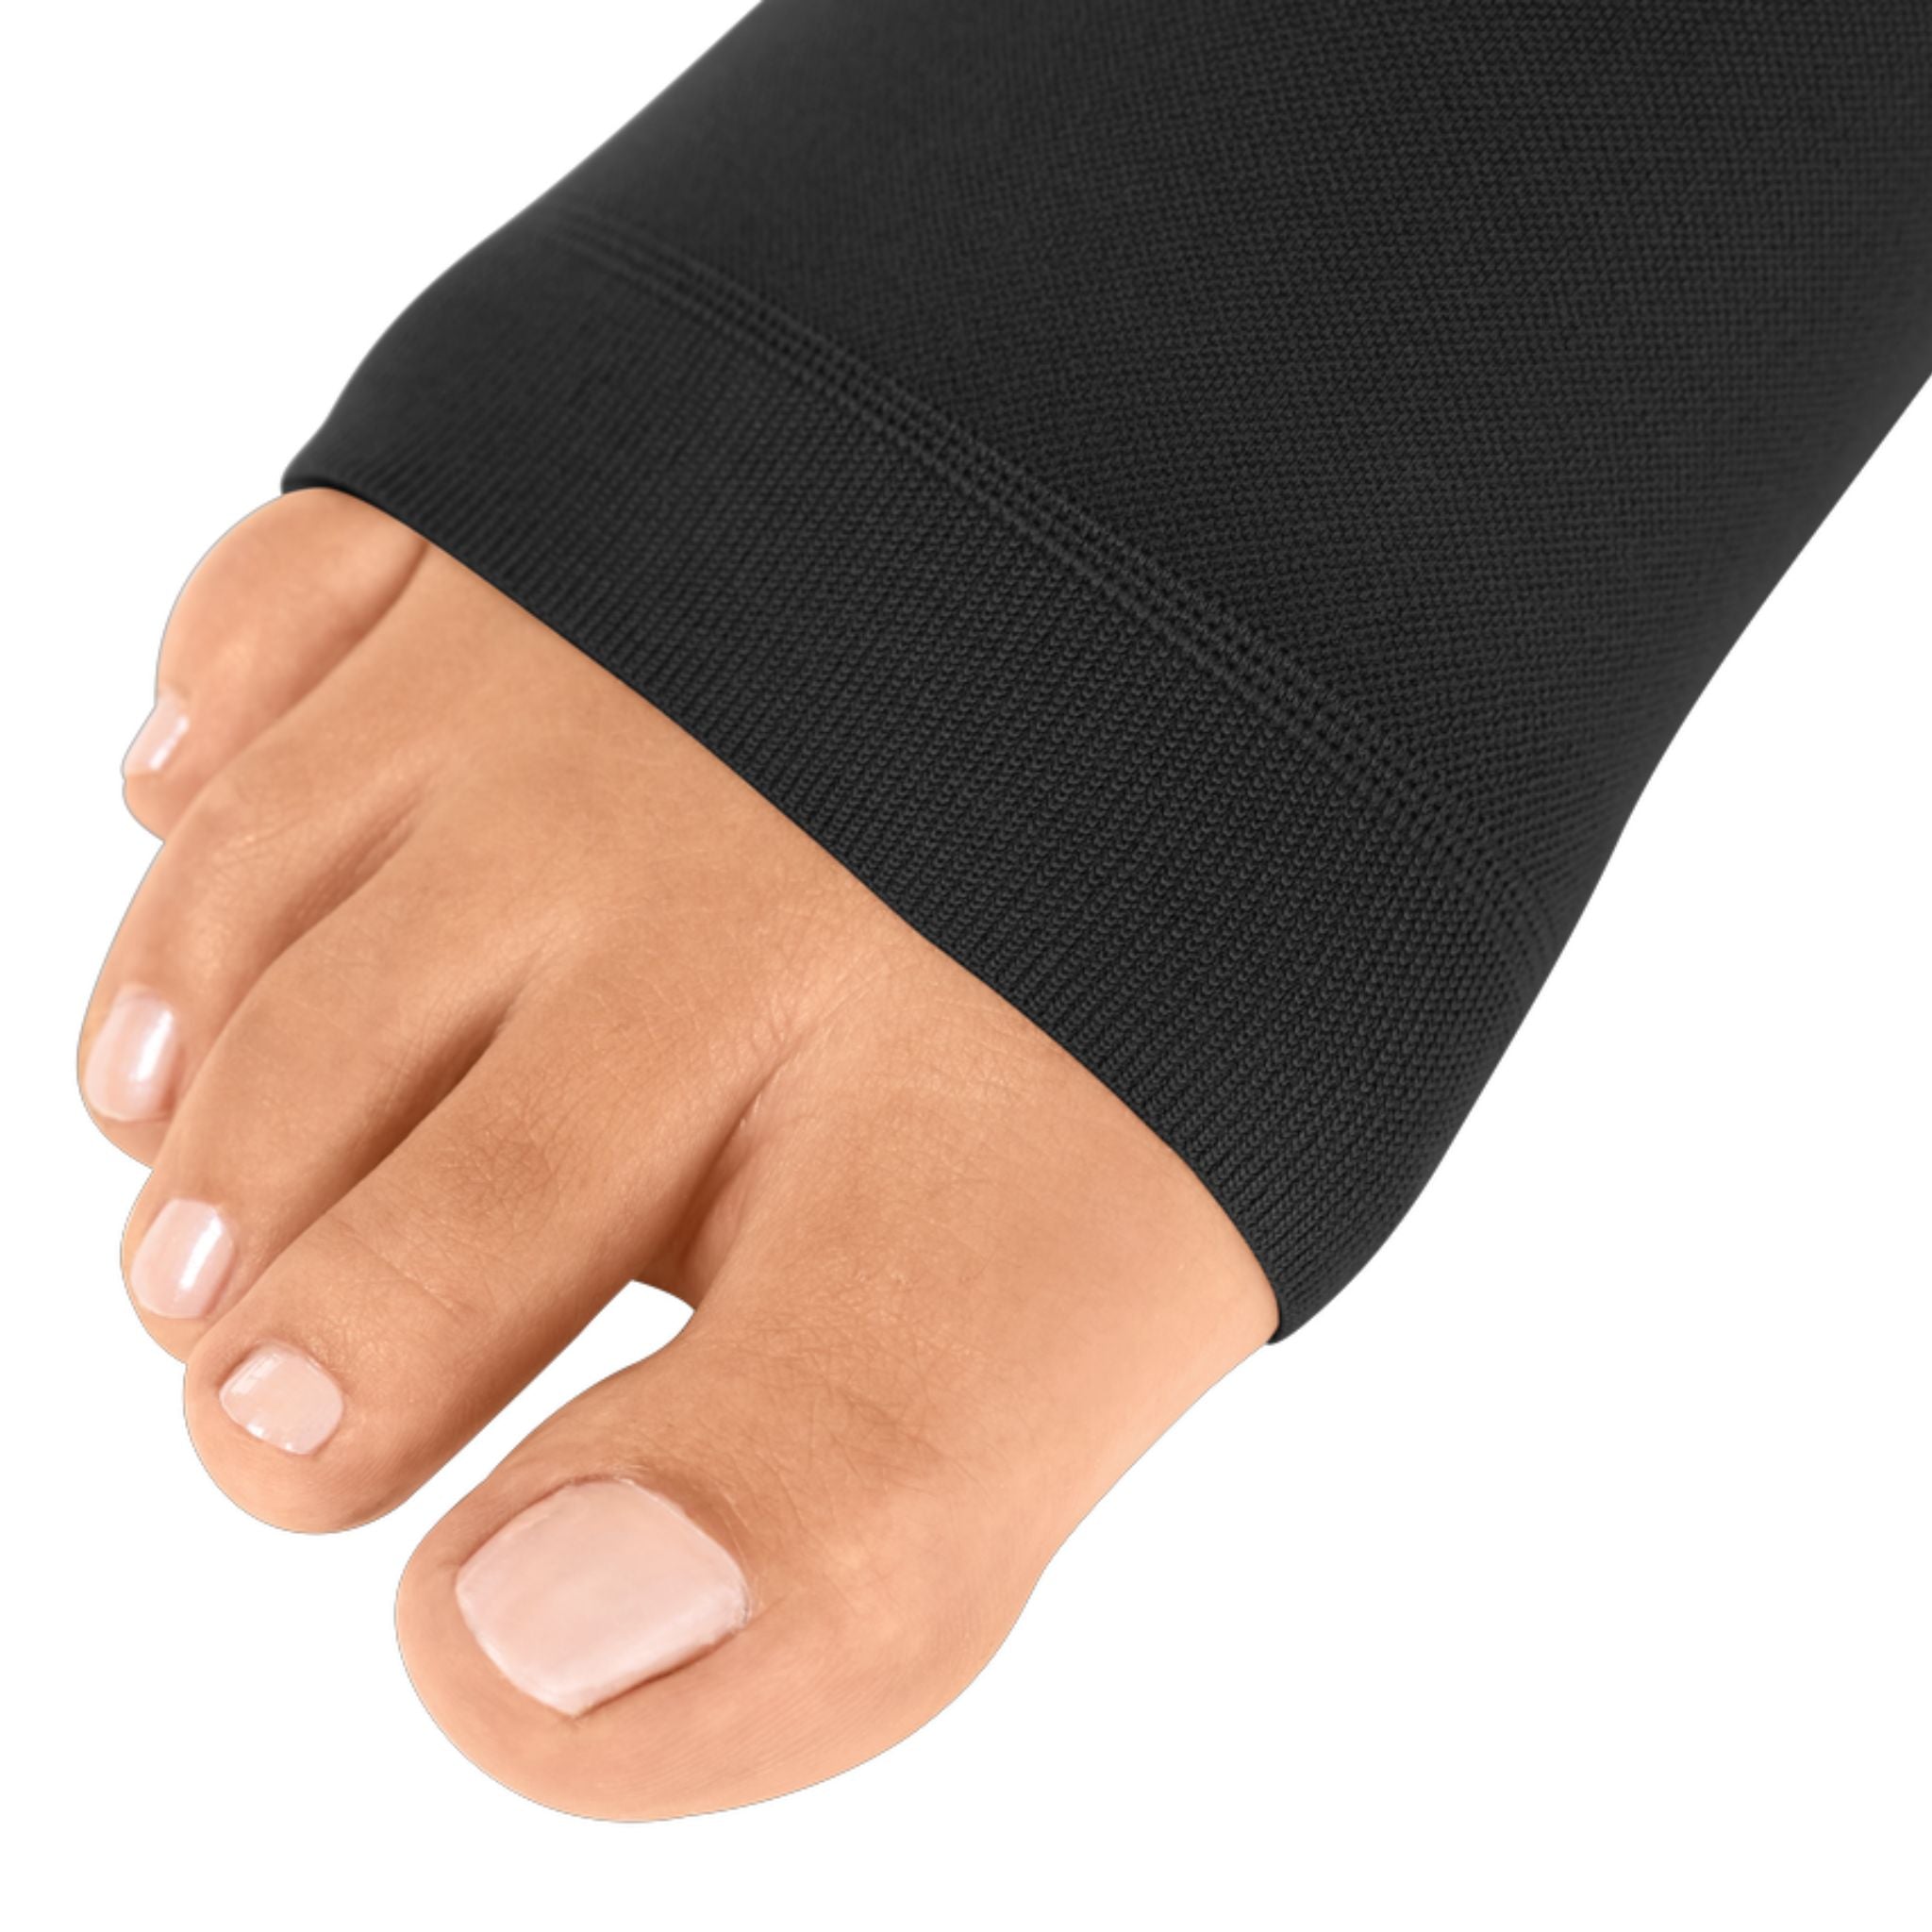 Compression Stockings | Thigh High | Sensitive Topband Wide | Open Toe | Black | mediven cotton